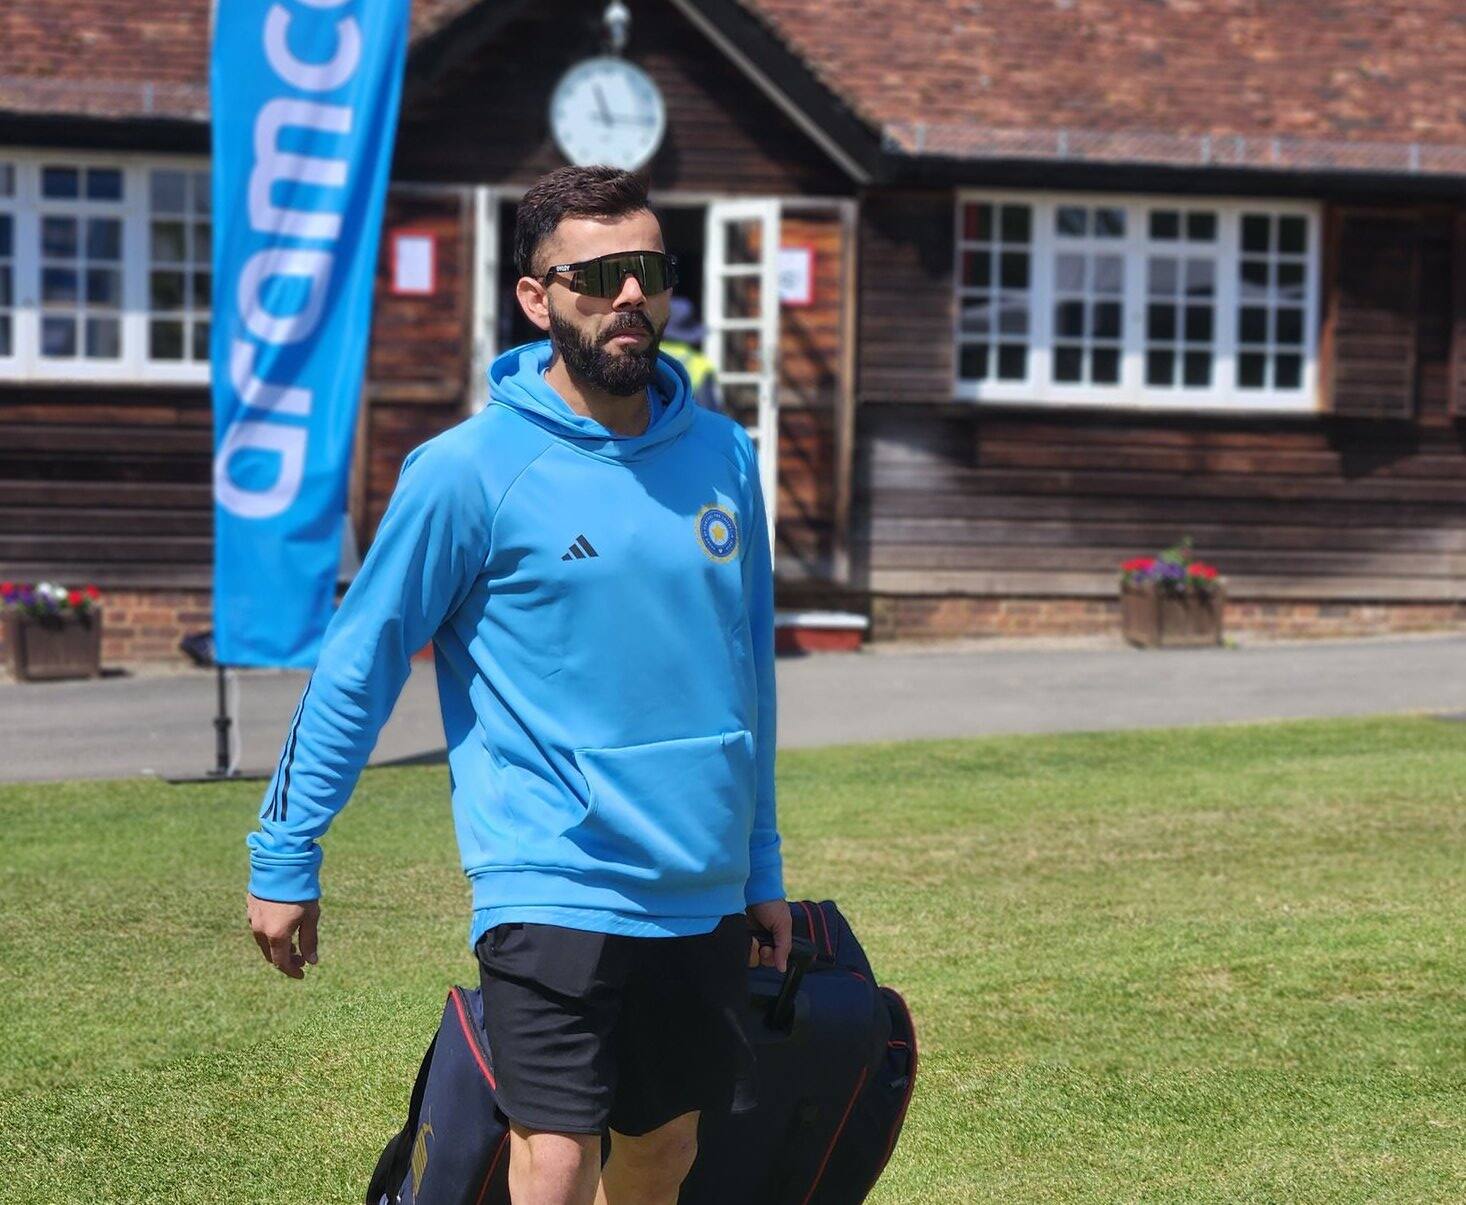 Kohli, Pujara Arrive for First Training Session Ahead of WTC Final